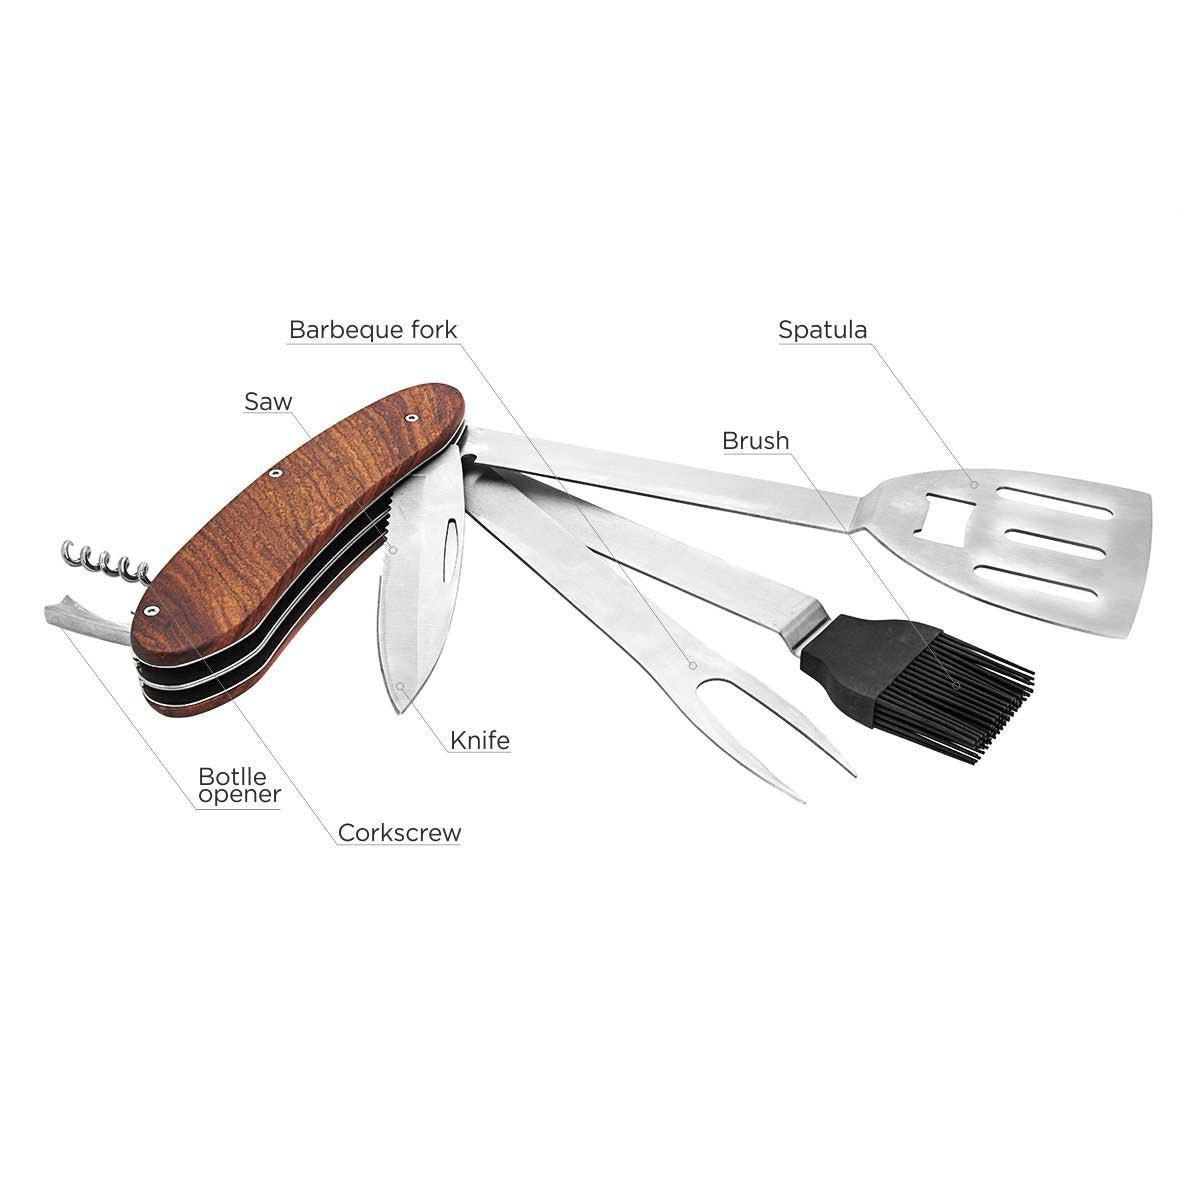 BBQ Multi Tool for Grill and Barbecue includes a spatula, a brush, a bbq fork, a knife, a corkscrew, a bottle opener and a saw